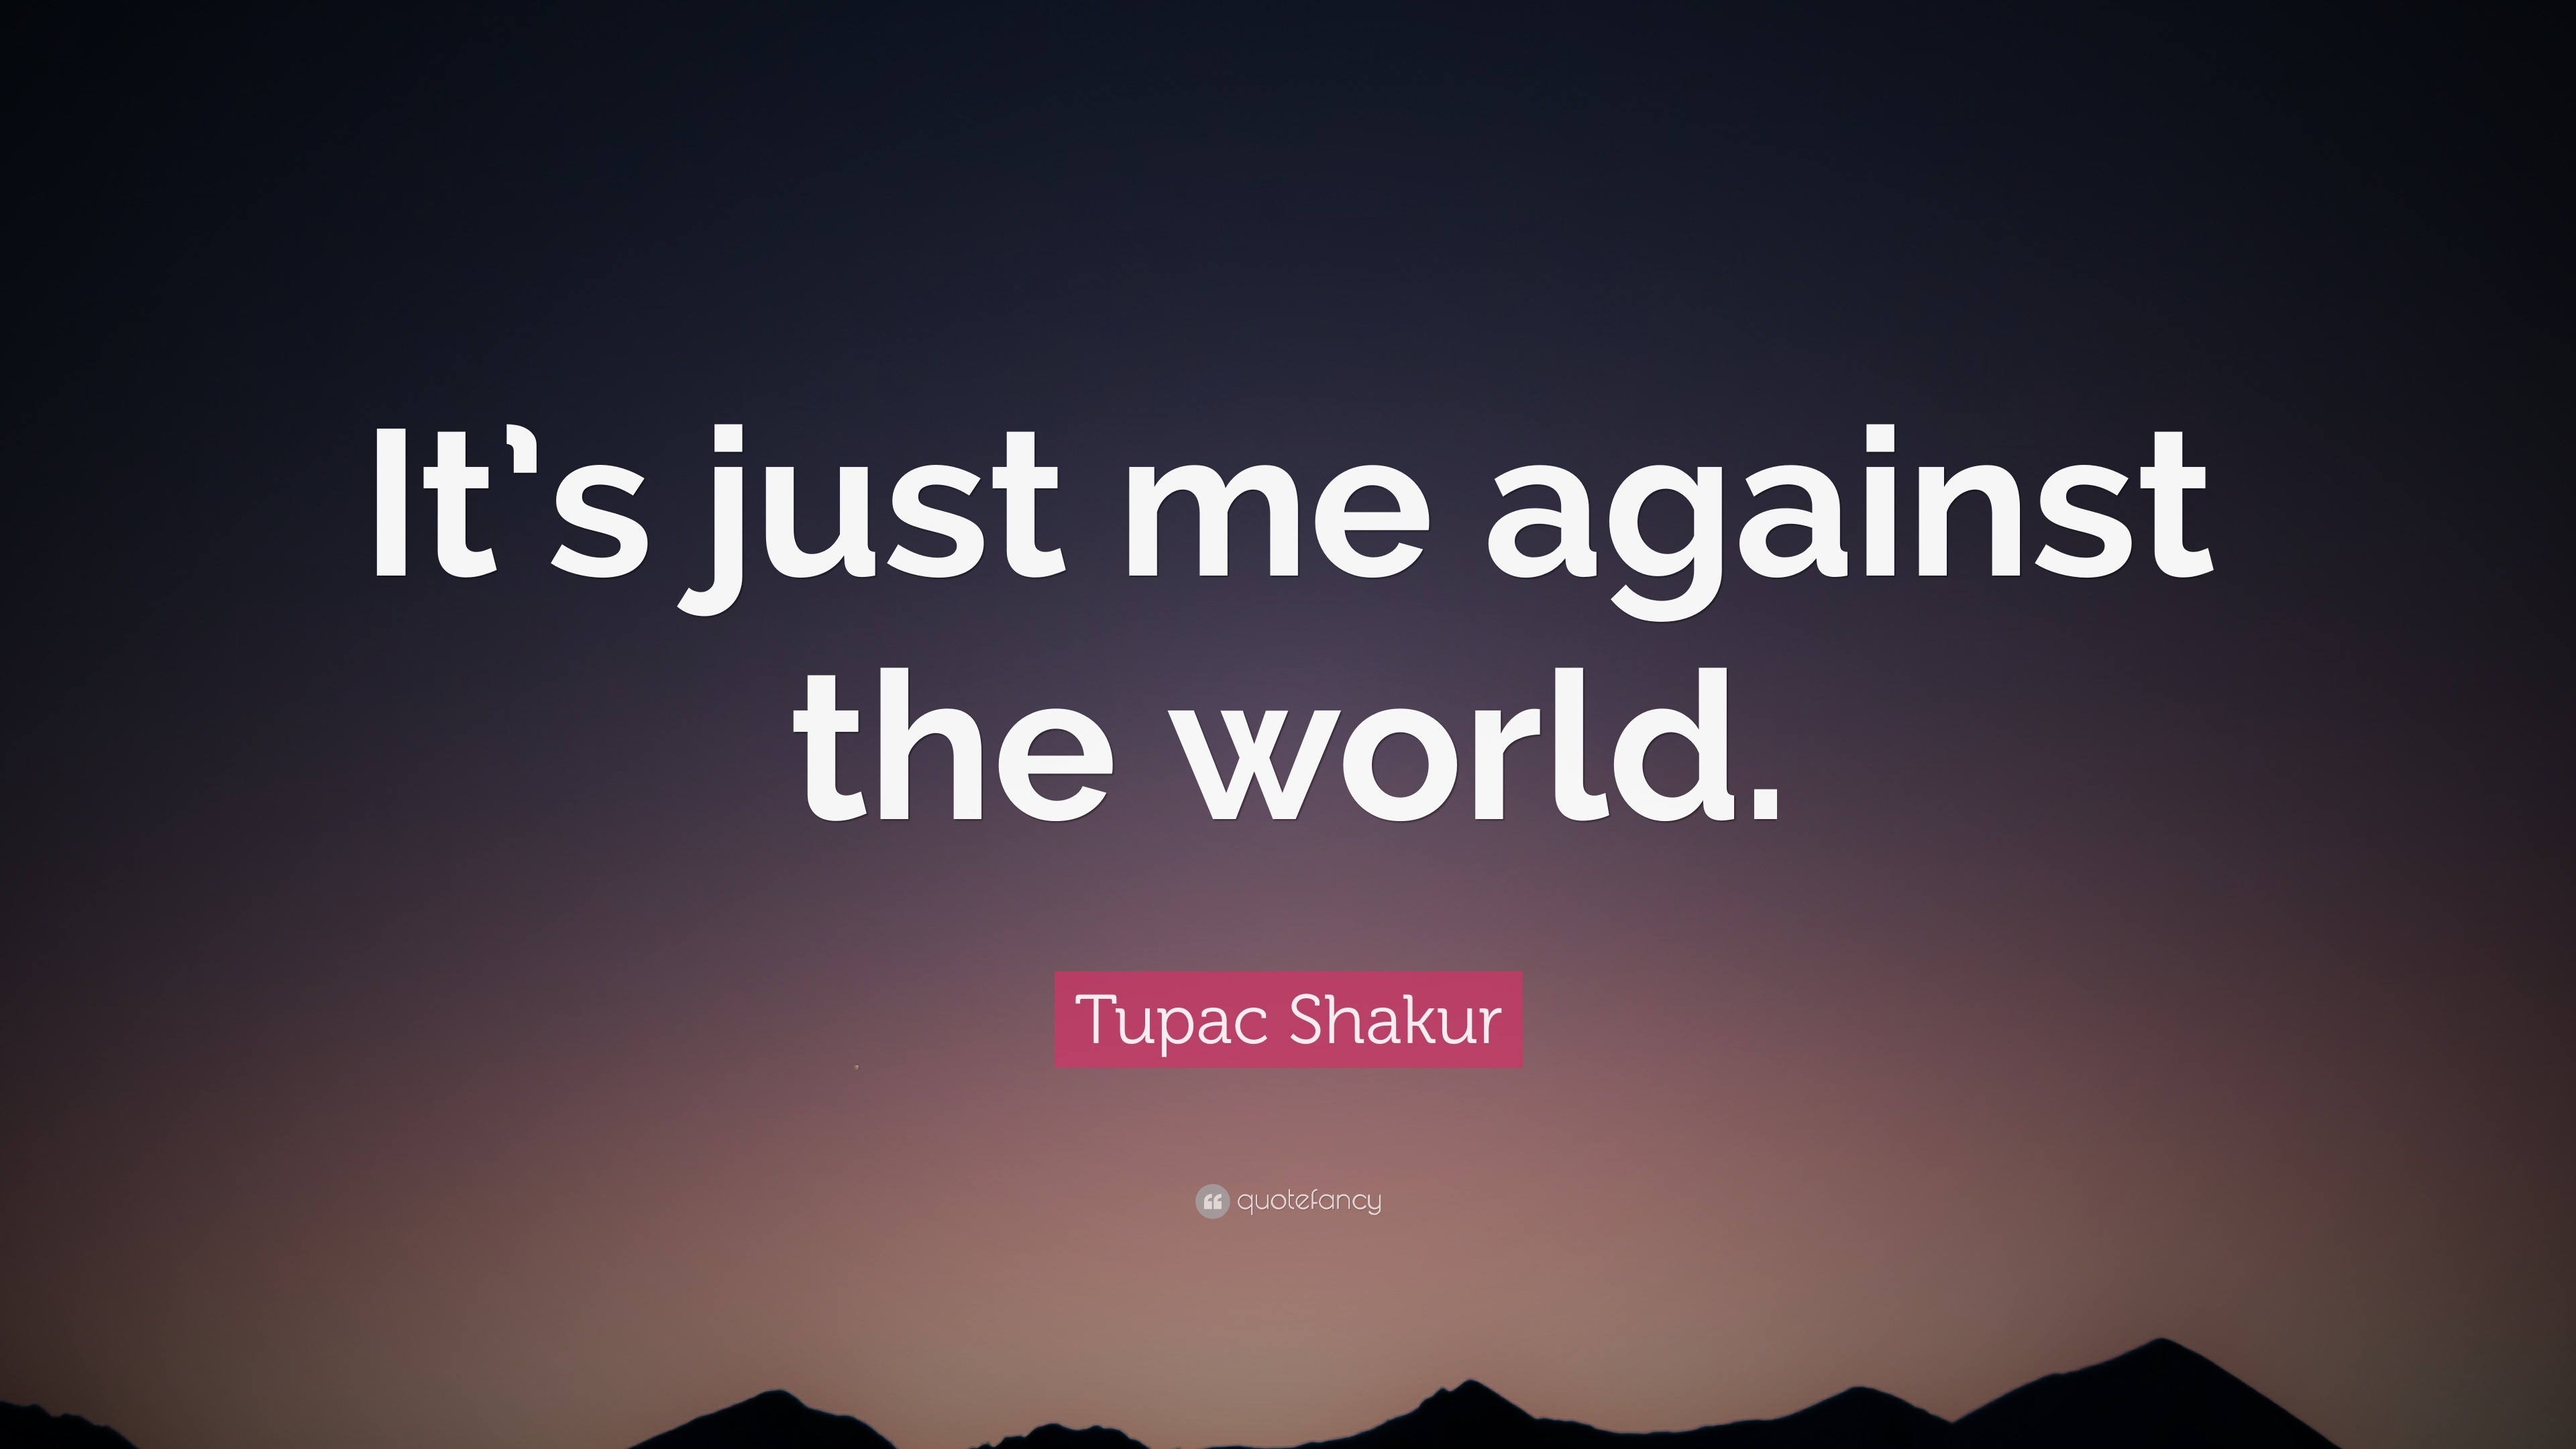 Tupac Shakur Quote: “It's Just Me Against The World.”